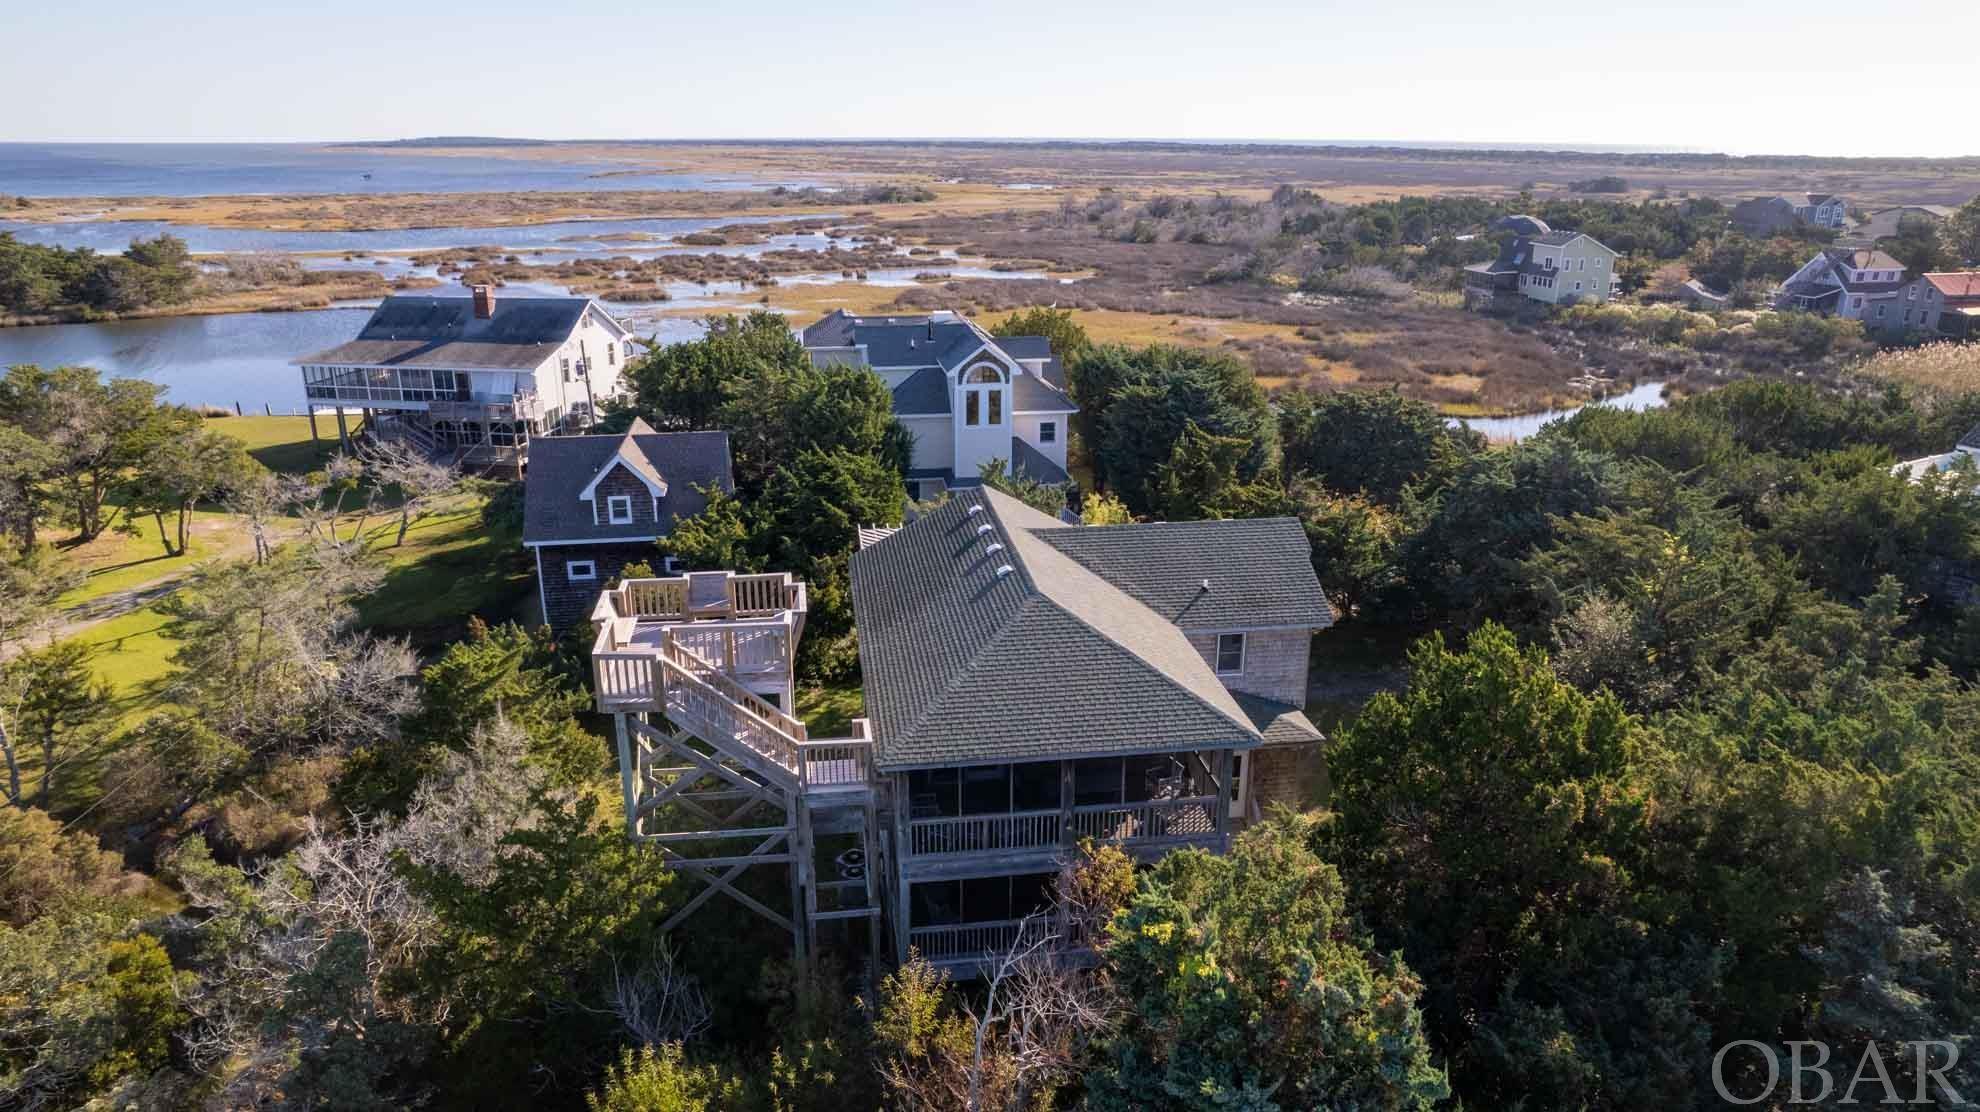 This beautiful custom built home is just one house down from end of a dead-end road with a foot path to canal connecting to Pamlico Sound providing kayak, SUP or john boat access to all residents of Sarah Ellen. Artfully designed, the reverse floor plan offers privacy and excellent natural lighting.  Multi level decks and screened porches capitalize on the tranquil setting.  A roof top deck with built in seating offers panoramic views from sound to ocean.  The first floor has 3 bedrooms and a full bath, washer dryer, an office/study/bonus room and a large room with its own exterior door access which could be used as an additional bedroom (septic system can accommodate up to 4 bedrooms).  The second floor has an open floor plan and cathedral ceilings with a spacious kitchen open to a dining and living area and a 1/2 bath.  Also on this floor is master bedroom with its own custom tiled bath.  A large, full house length 2 level screened porch runs along the back of the house, two level open decks adorn the front.  On the north side the large roof top deck boasts spectacular views and sunsets.  This home is currently seller's primary residence but could easily become a spectacular vacation rental providing supplemental income.